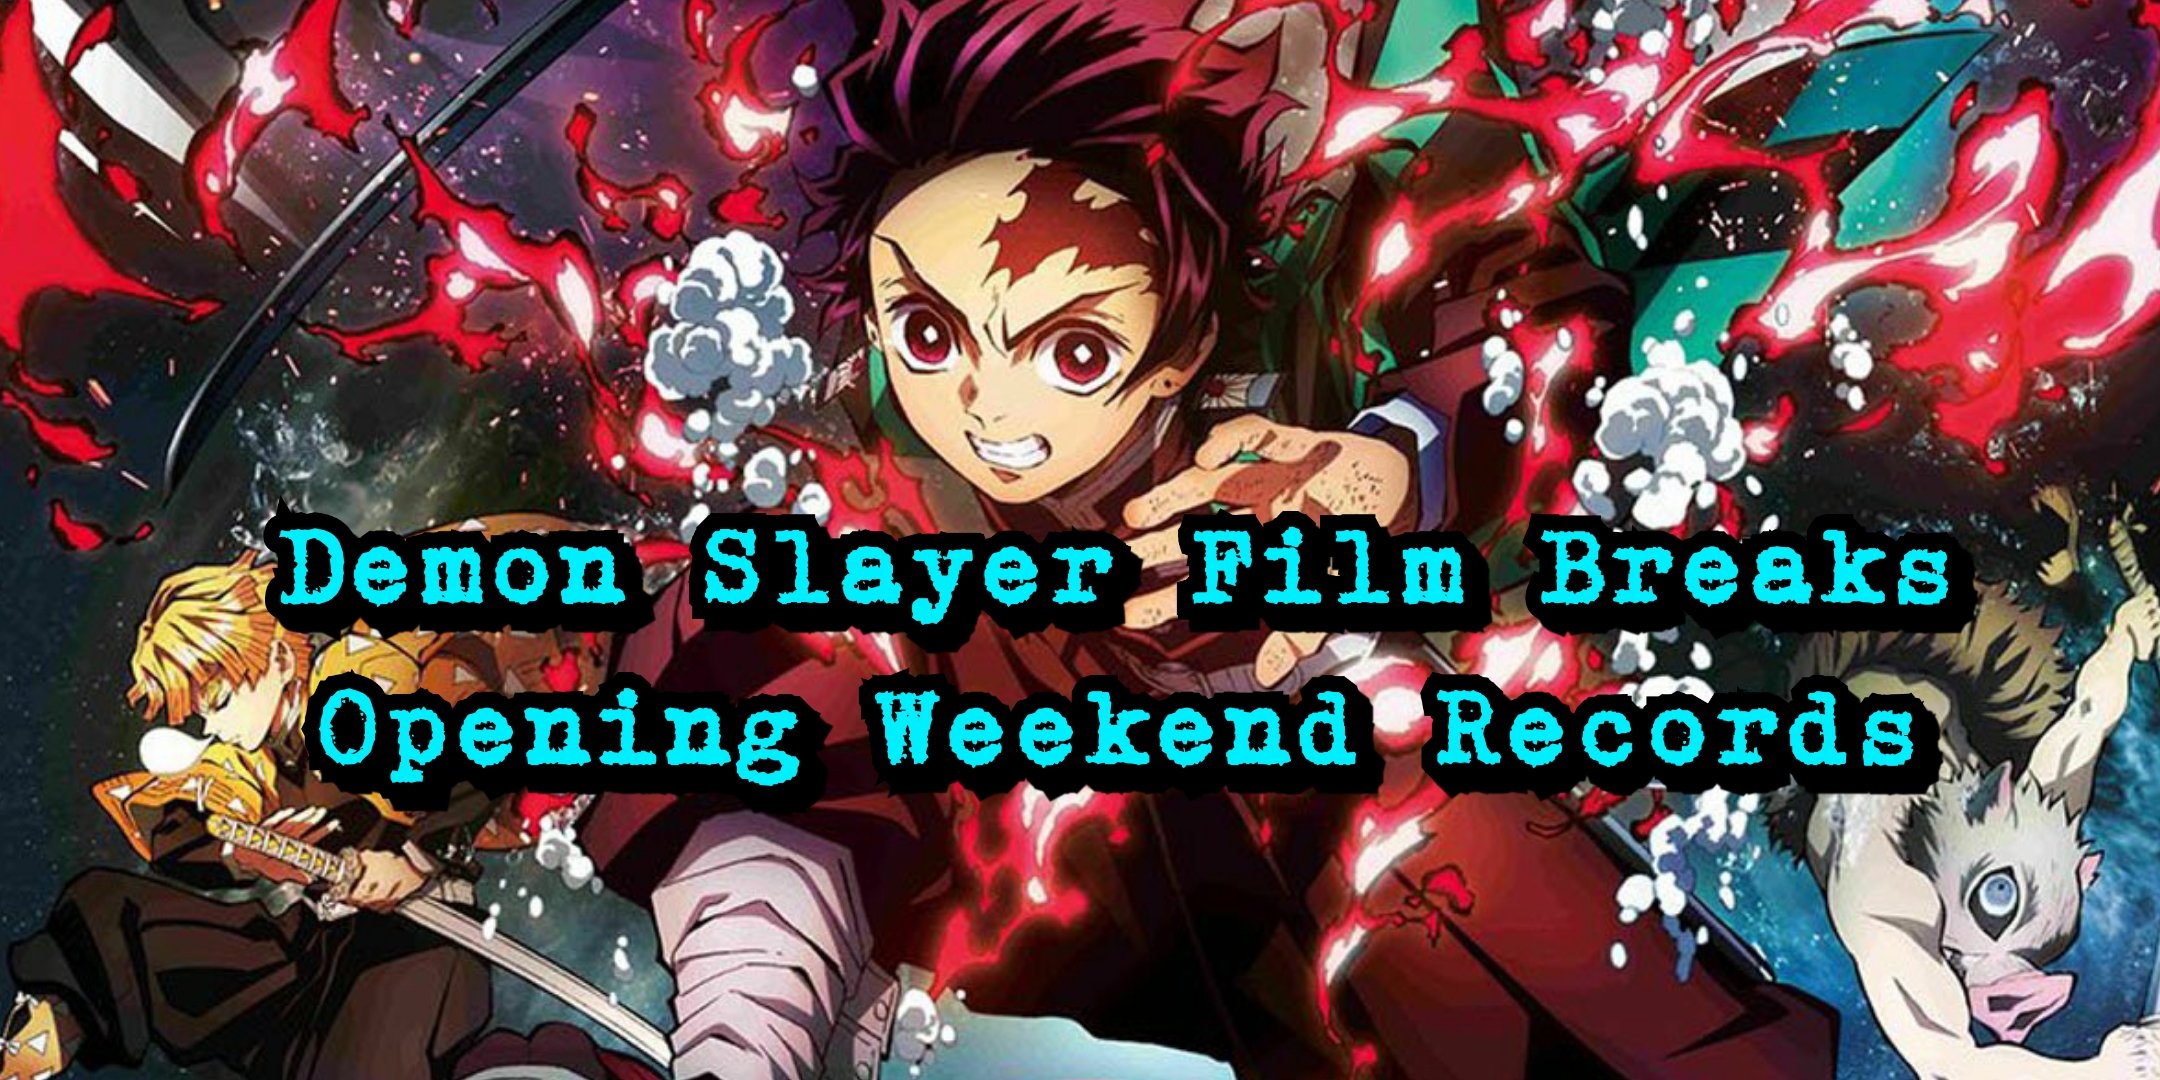 Anime: Demon Slayer Film Breaks Opening Weekend Records - Bell of Lost - Stories Of Water And Flame Demon Slayer